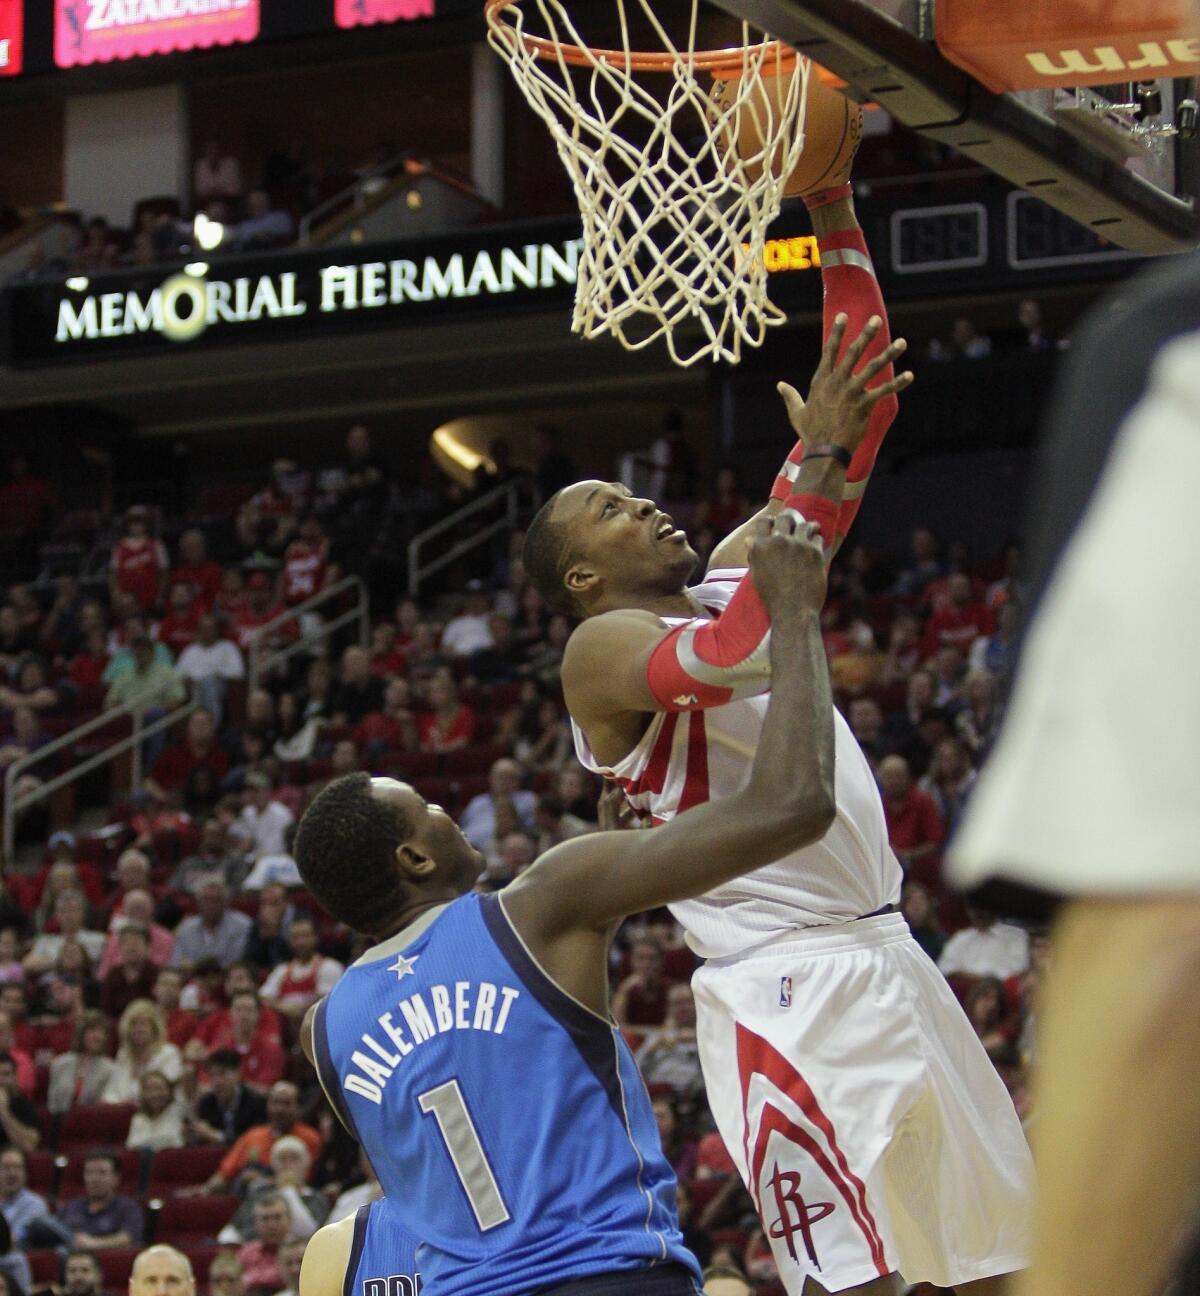 Former Lakers center Dwight Howard's unpopularity in Los Angeles has even spread to Clippers fans, who booed his appearance with his new team, the Houston Rockets.